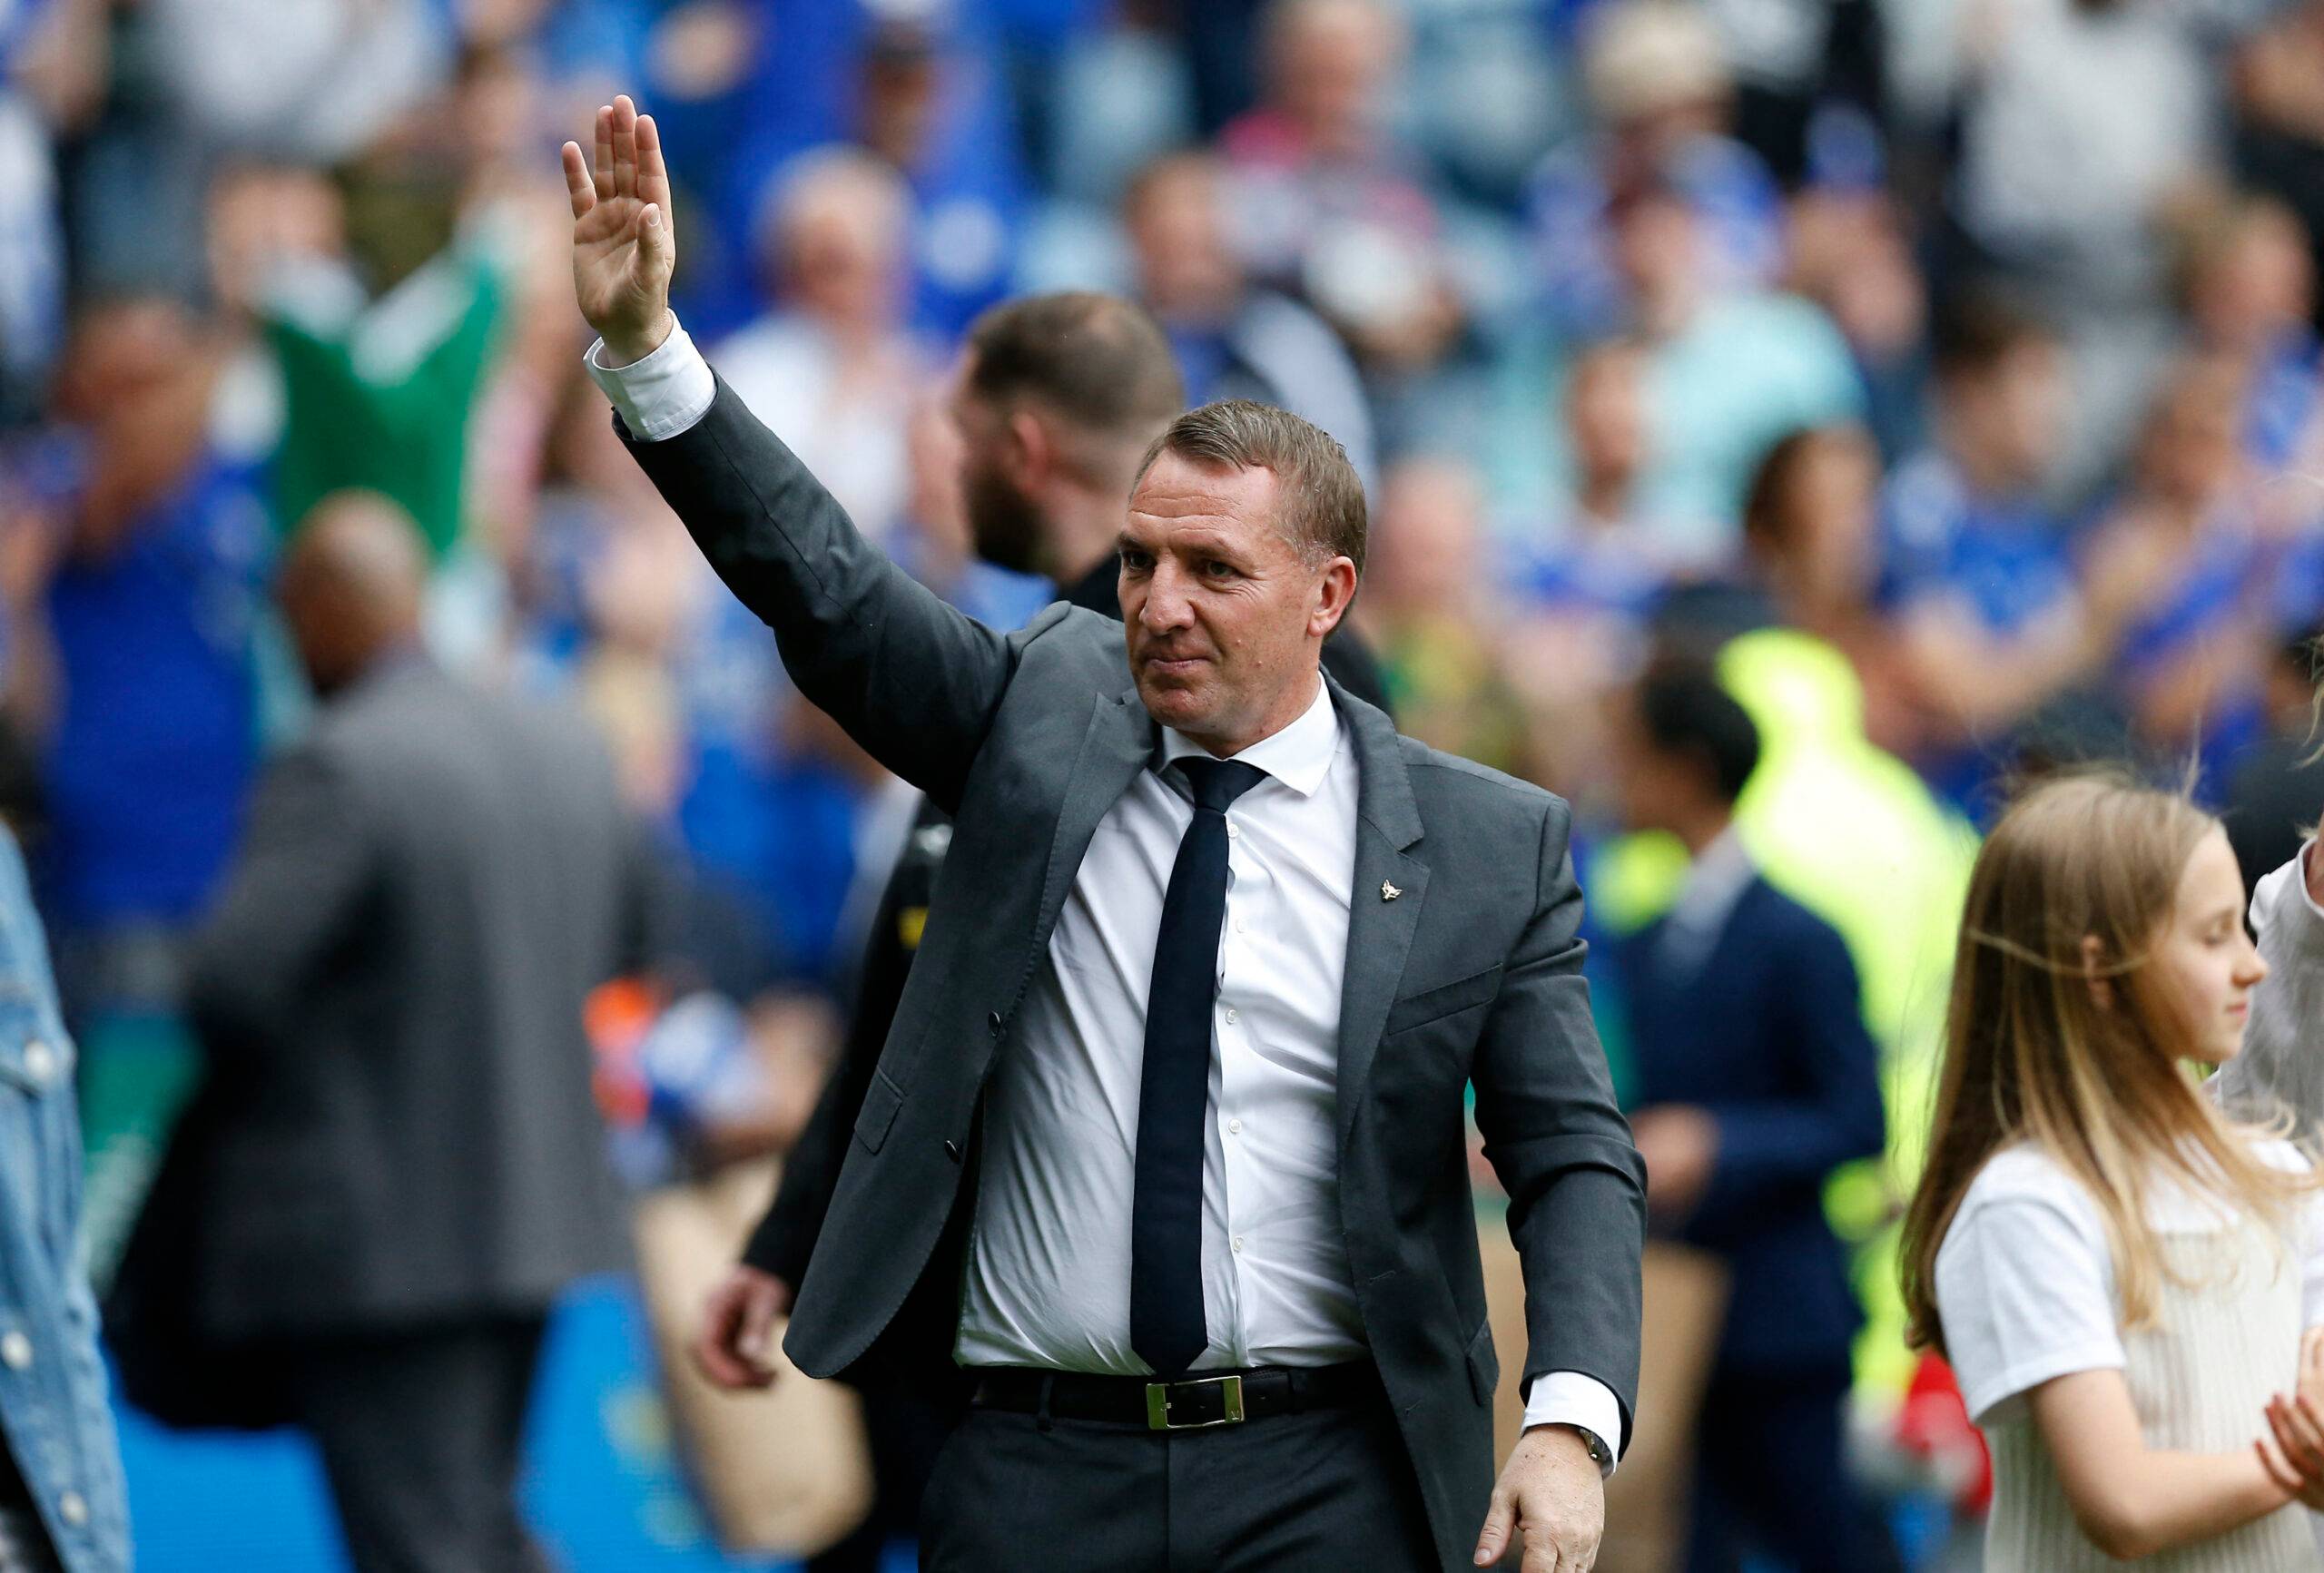 Brendan Rodgers takes charge of a Premier League game for Leicester City